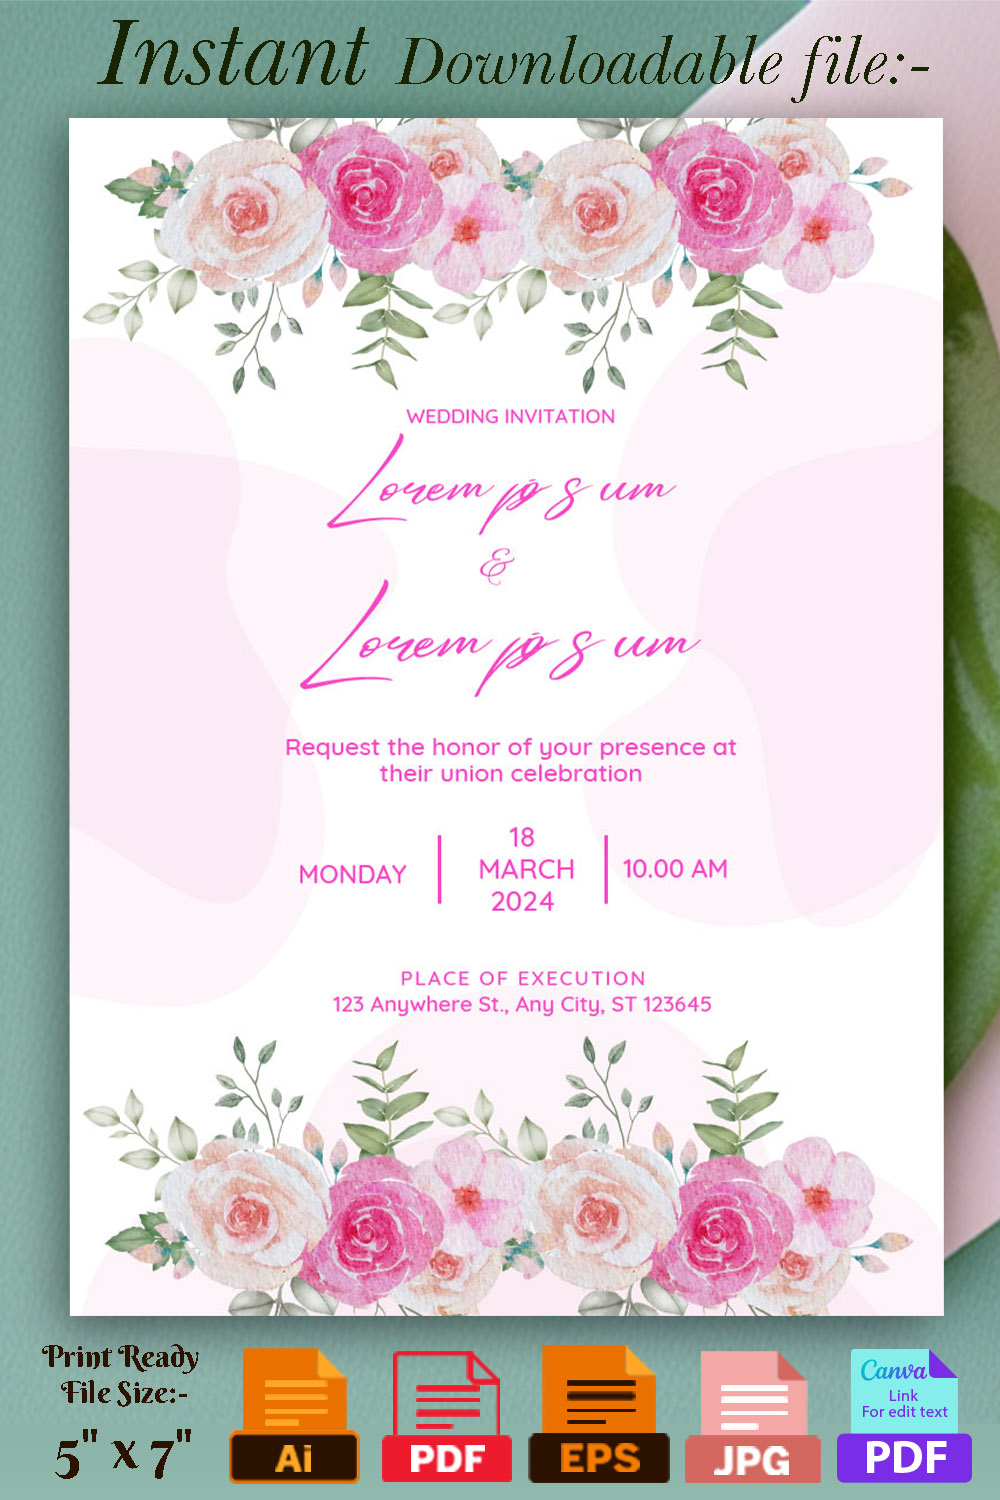 Image with gorgeous wedding invitation with rose flowers.